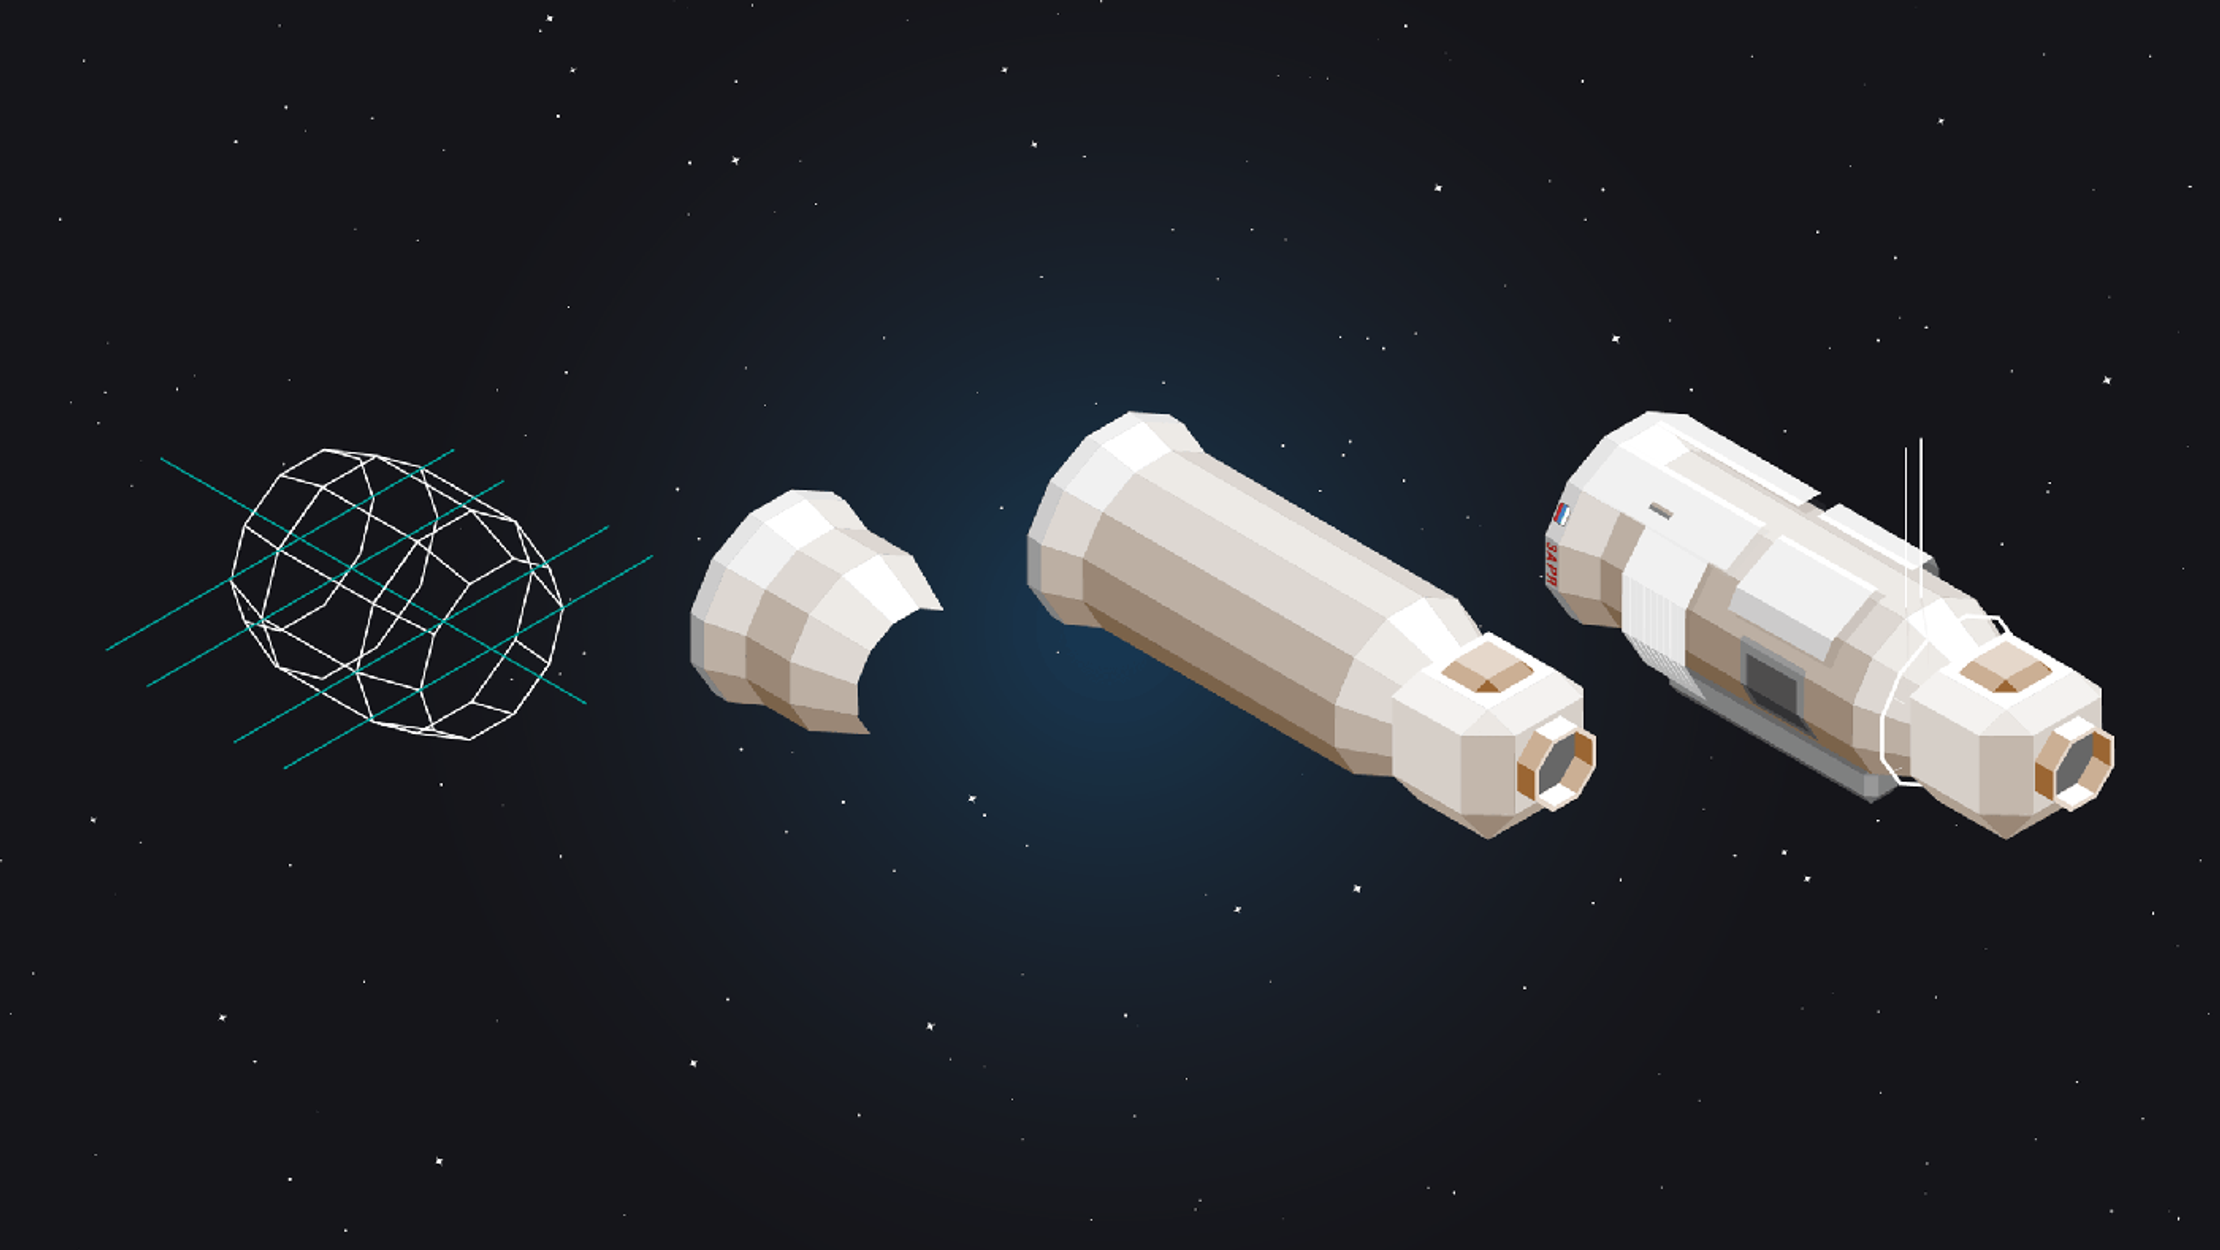 A wireframe and low-poly illustations of a module of the international space station in space. There are four iterations in total, with each more detailed than the previous version running from left to right.